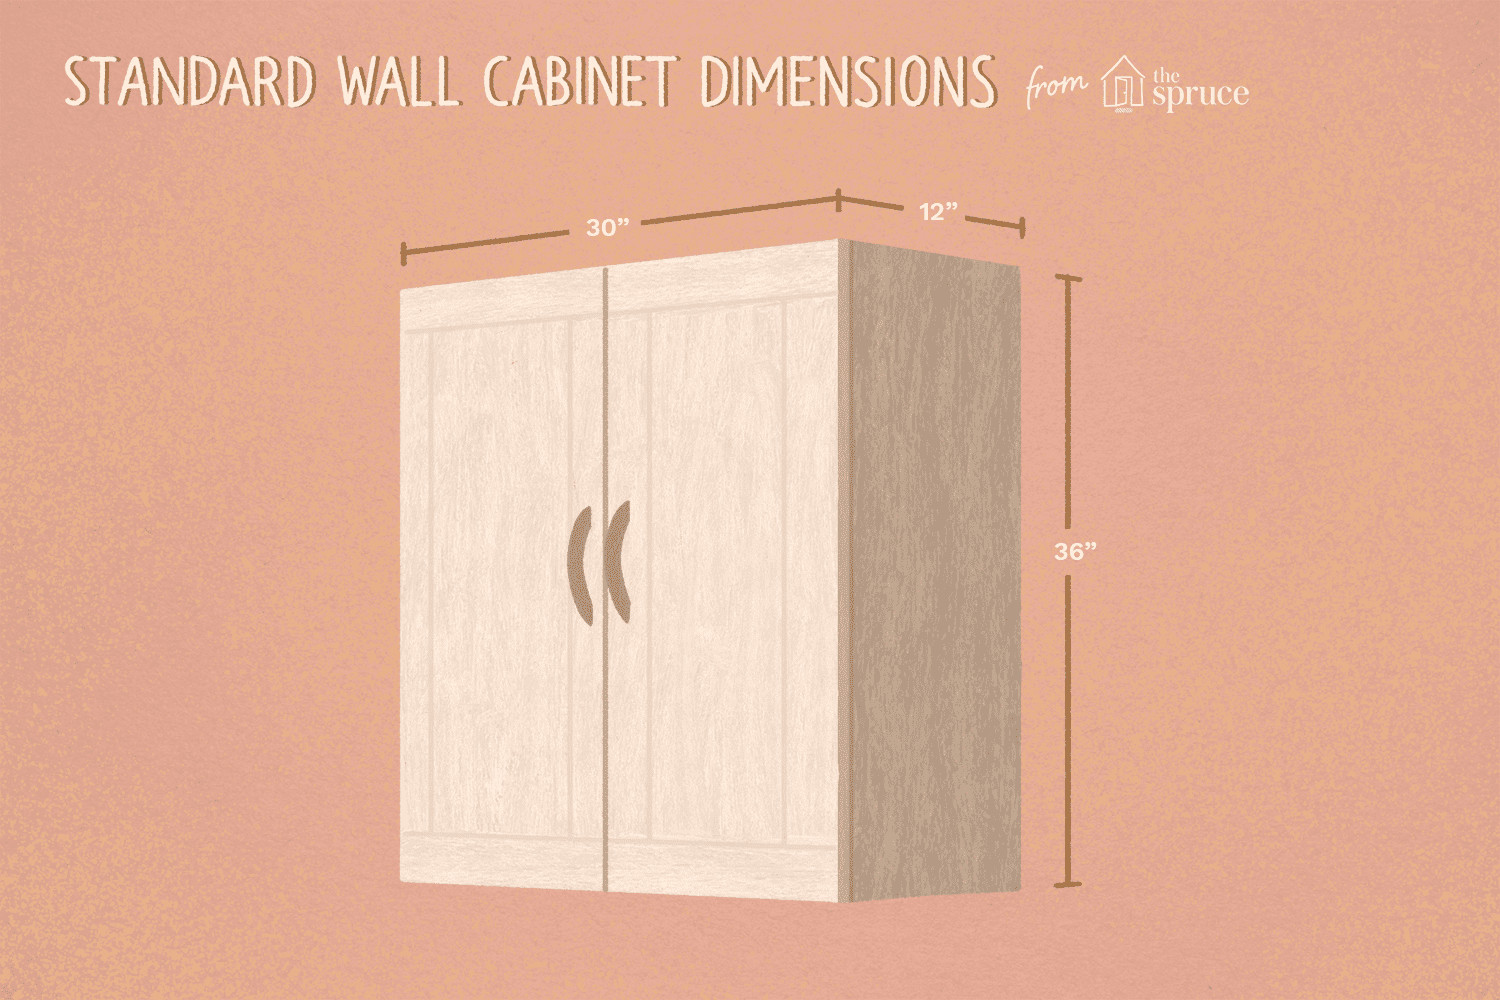 Kitchen Wall Cabinet Depth
 Guide to Standard Kitchen Cabinet Dimensions